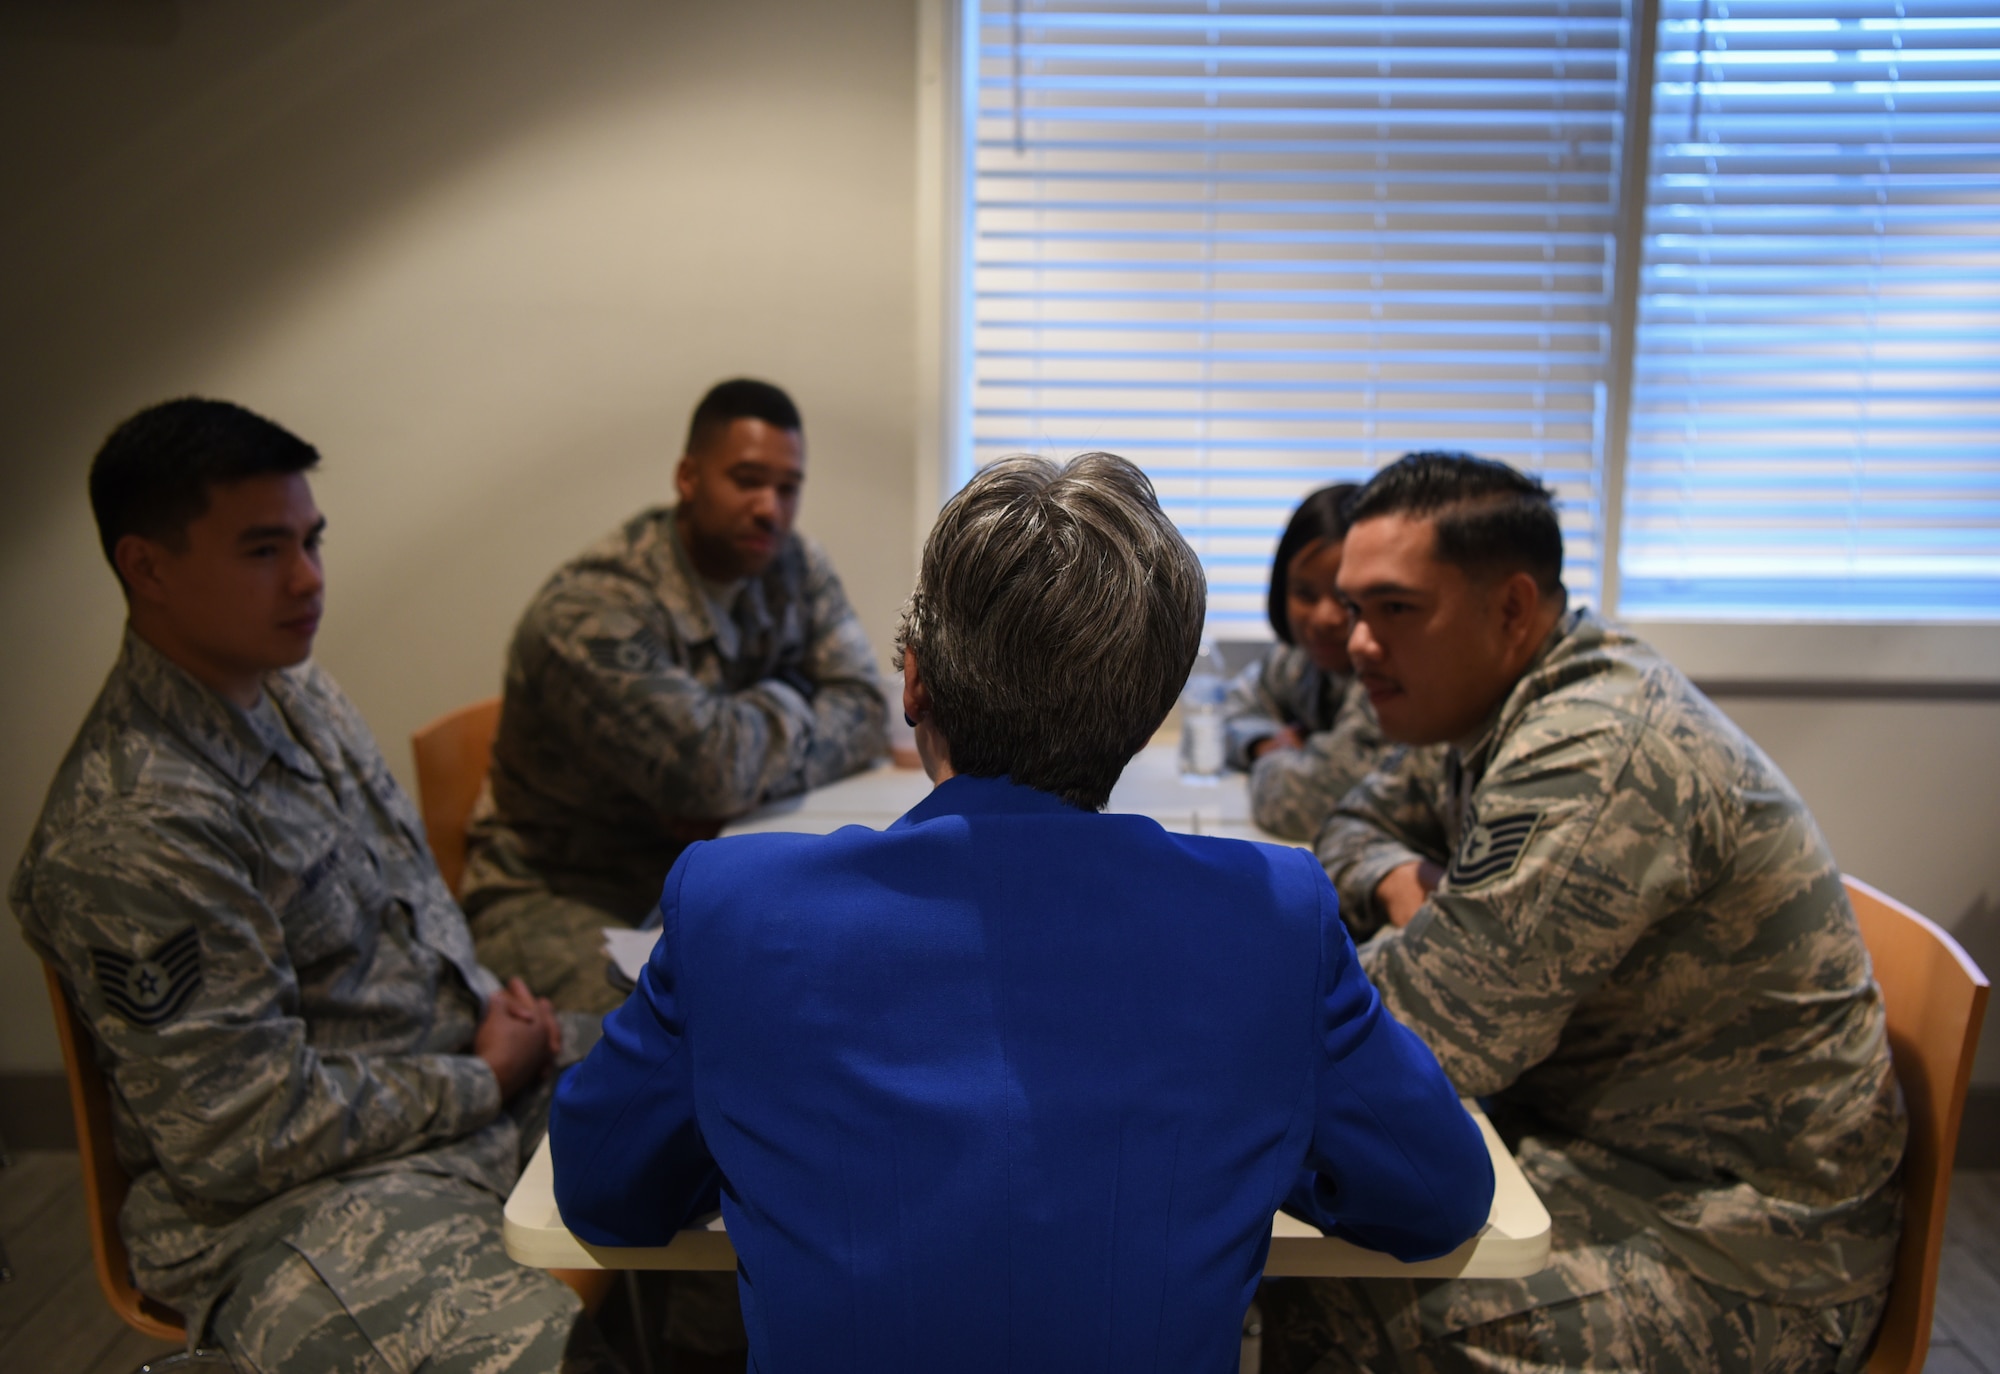 Secretary of the Air Force Heather Wilson speaks to Airmen during breakfast about life at F.E. Warren and their career within the military Aug. 8, 2018, at F.E. Warren Air Force Base, Wyo. Wilson was able to speak with several groups of Airmen during the breakfast and provided insight to the rumored changes regionally and nationally impacting the Air Force. Wilson visited F.E. Warren Air Force Base to emphasize the importance of the 90th Missile Wing’s deterrence mission and to thank the Airmen for ensuring the mission is accomplished safely, securely and effectively every day. (U.S. Air Force photo by Airman 1st Class Abbigayle Wagner)